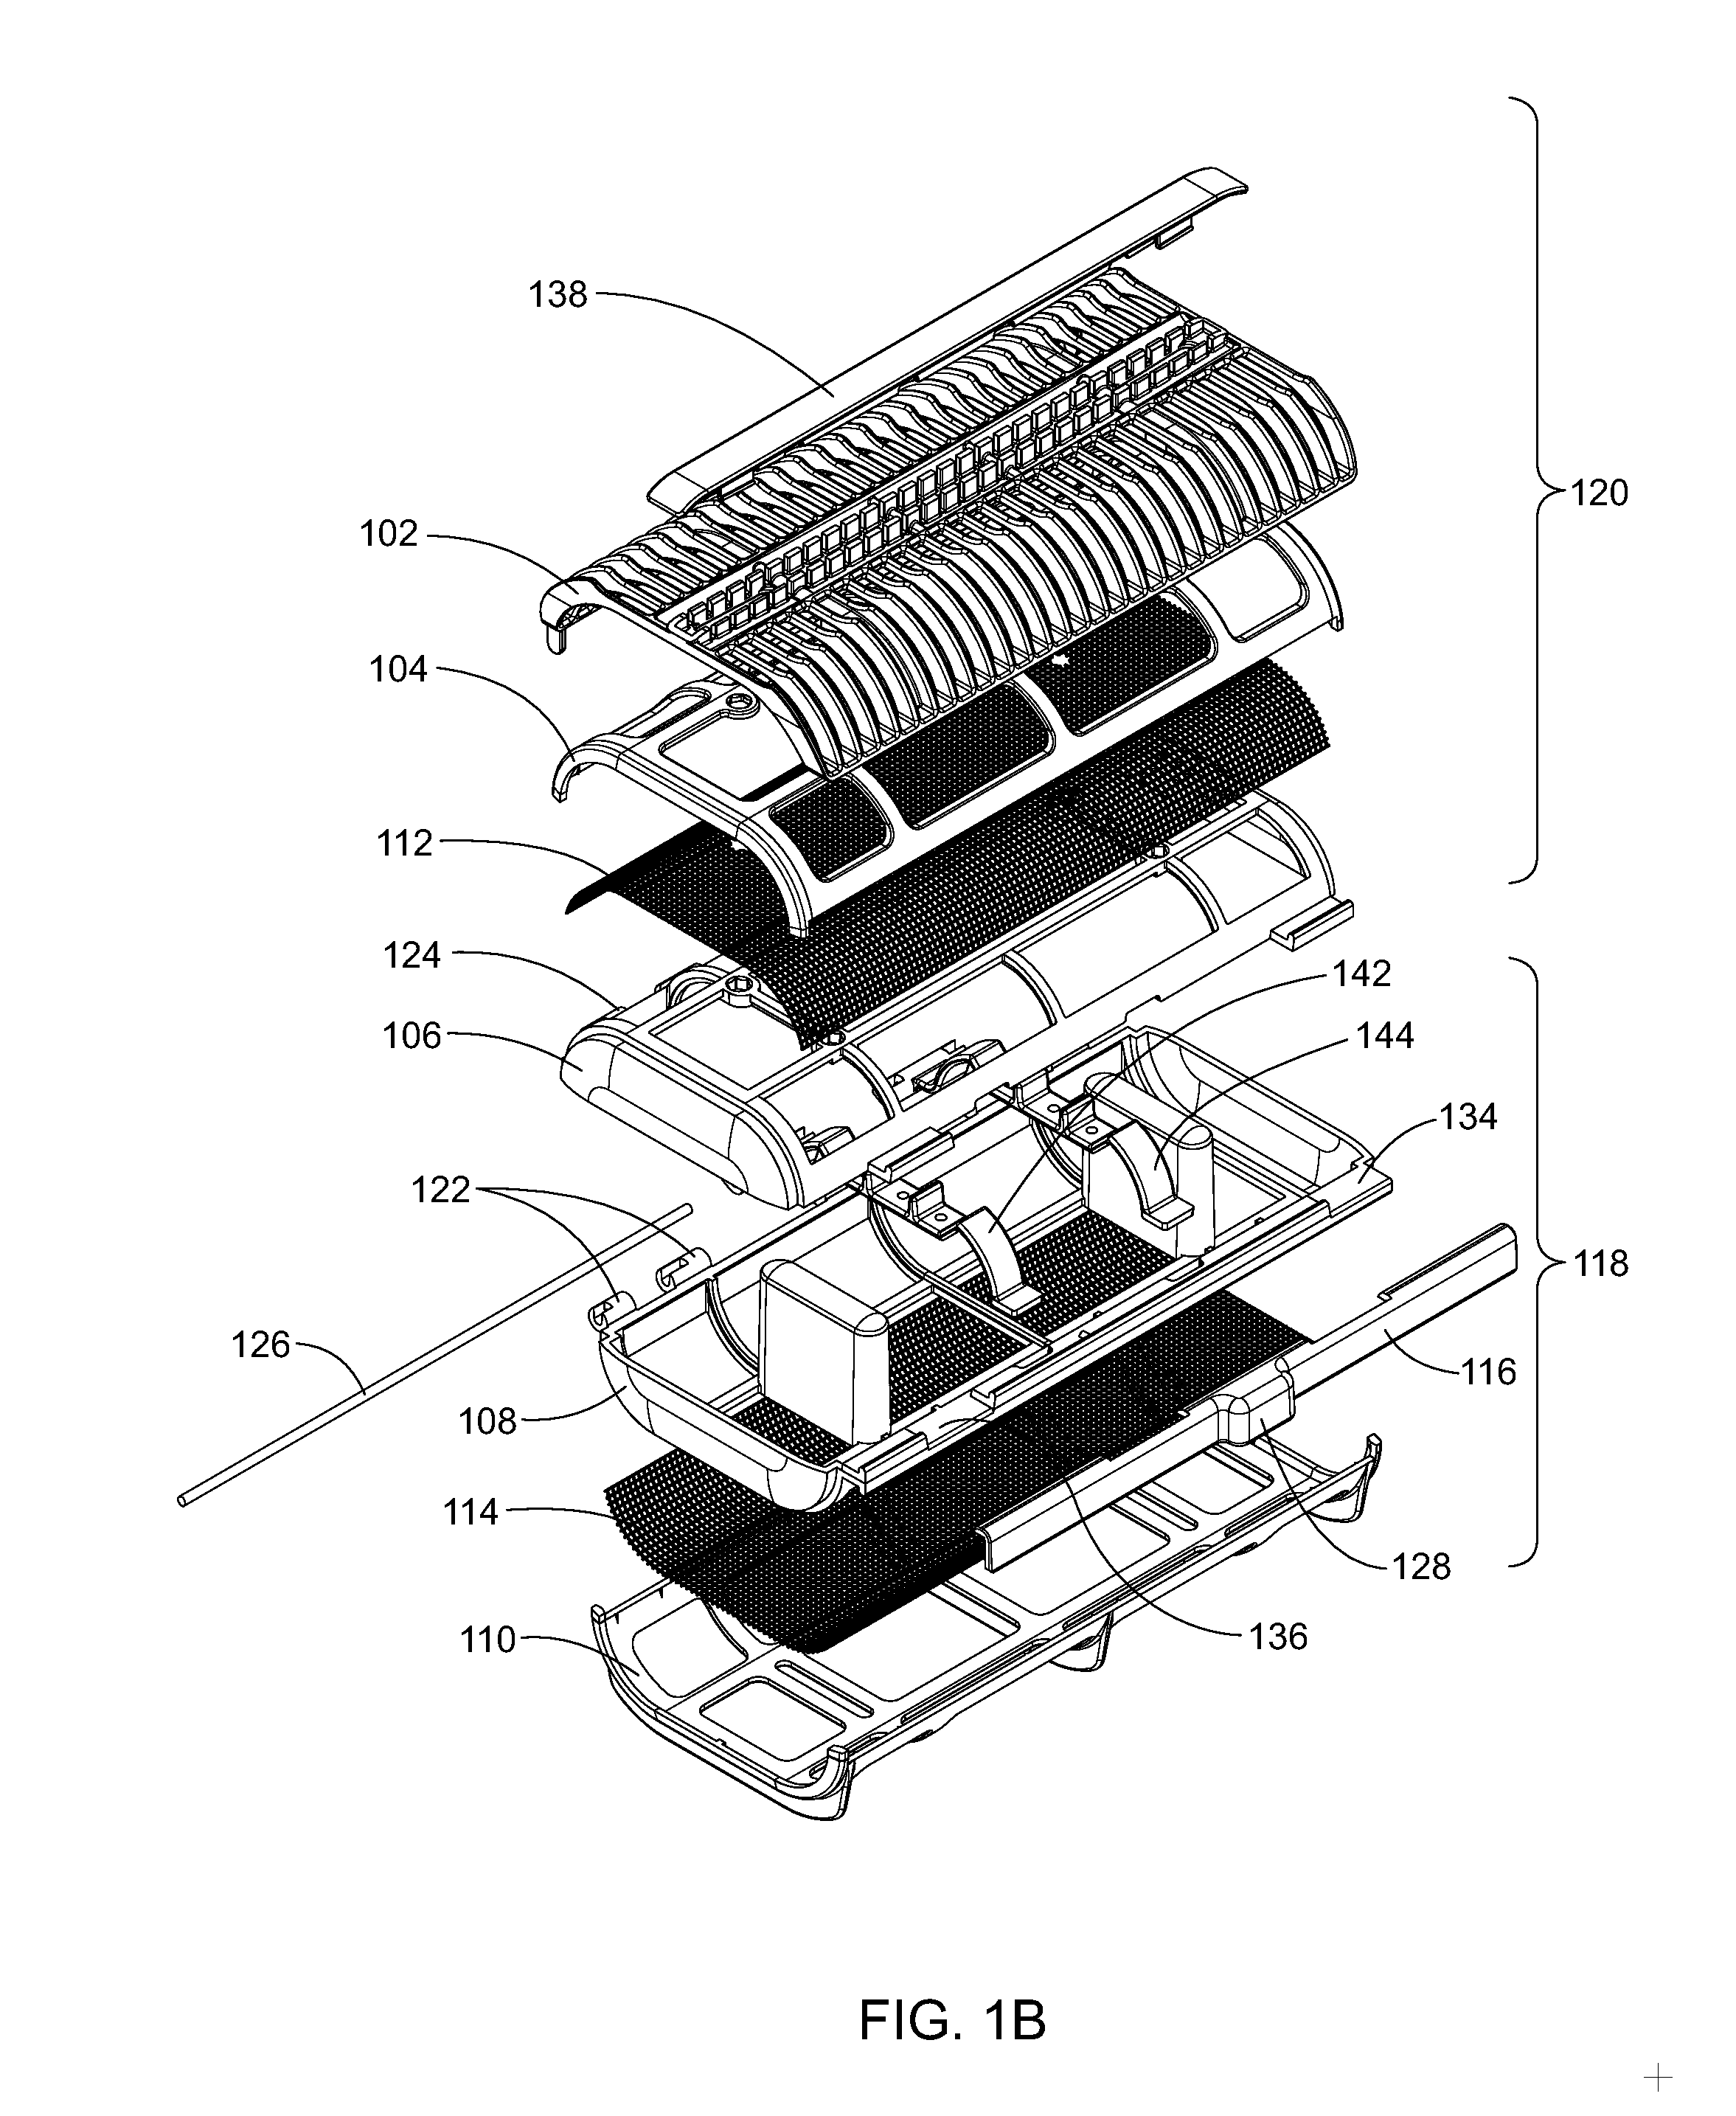 Apparatus and method for cleaning objects